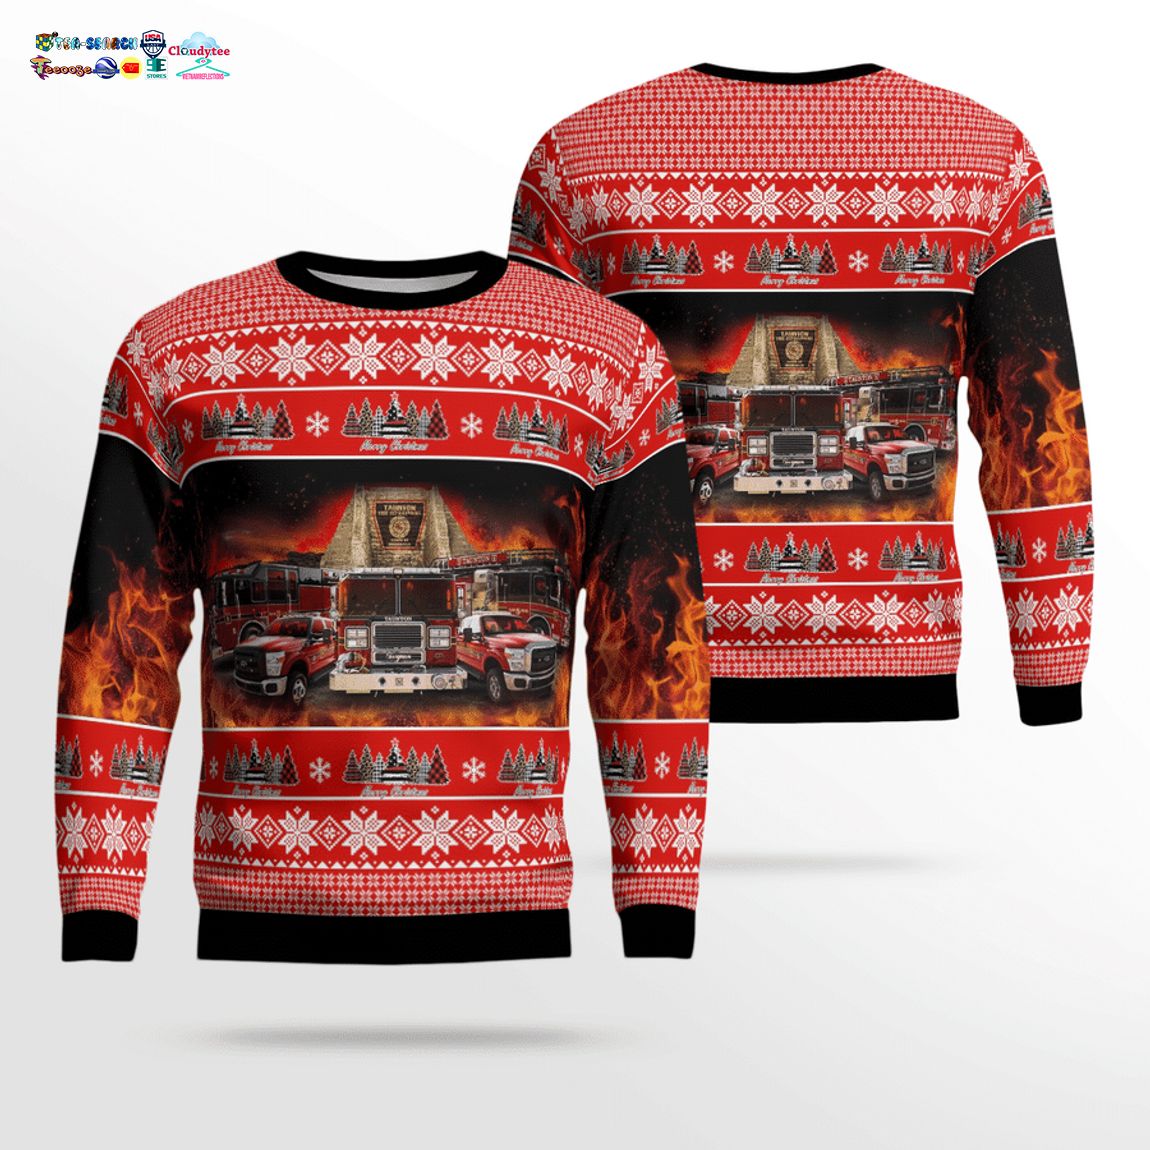 New York Taunton Fire Department 3D Christmas Sweater - Great, I liked it